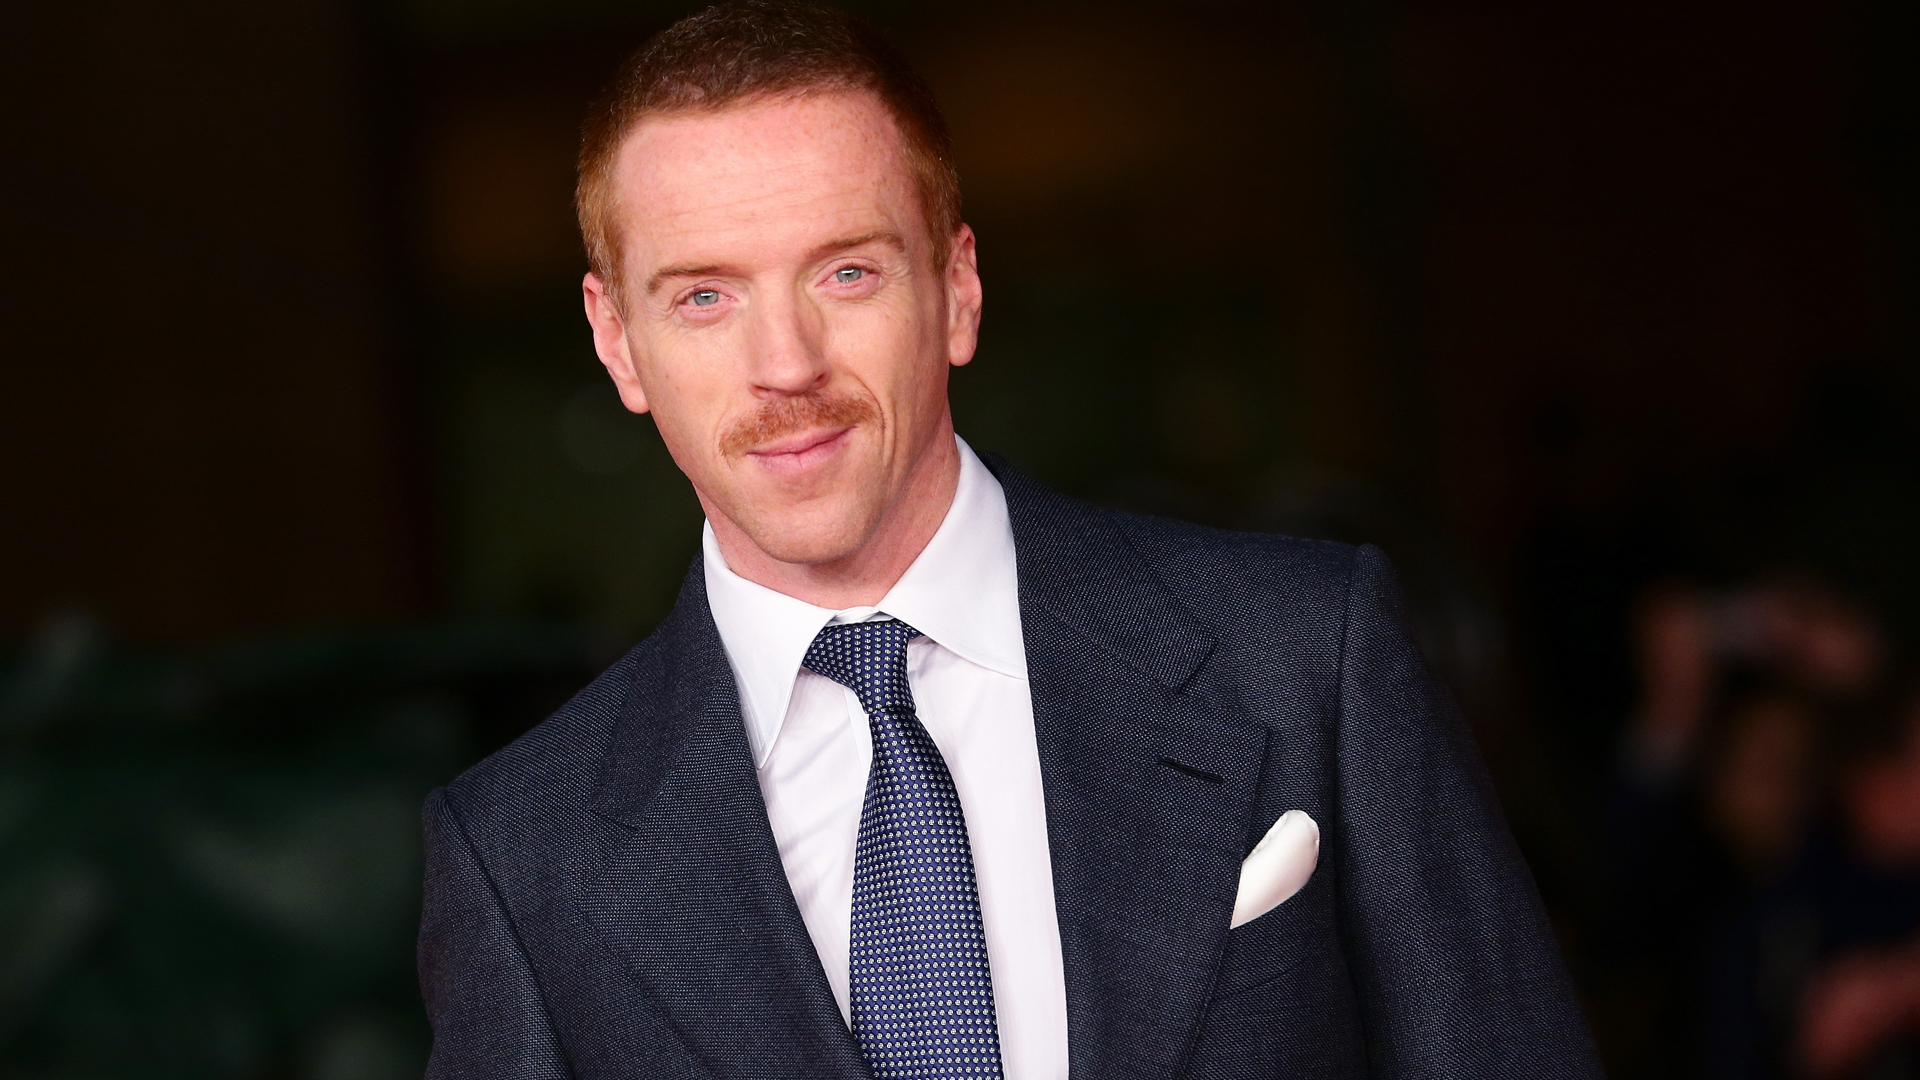 Damian Lewis will play Henry VIII in "Wolf Hall". (Photo: Masterpiece)